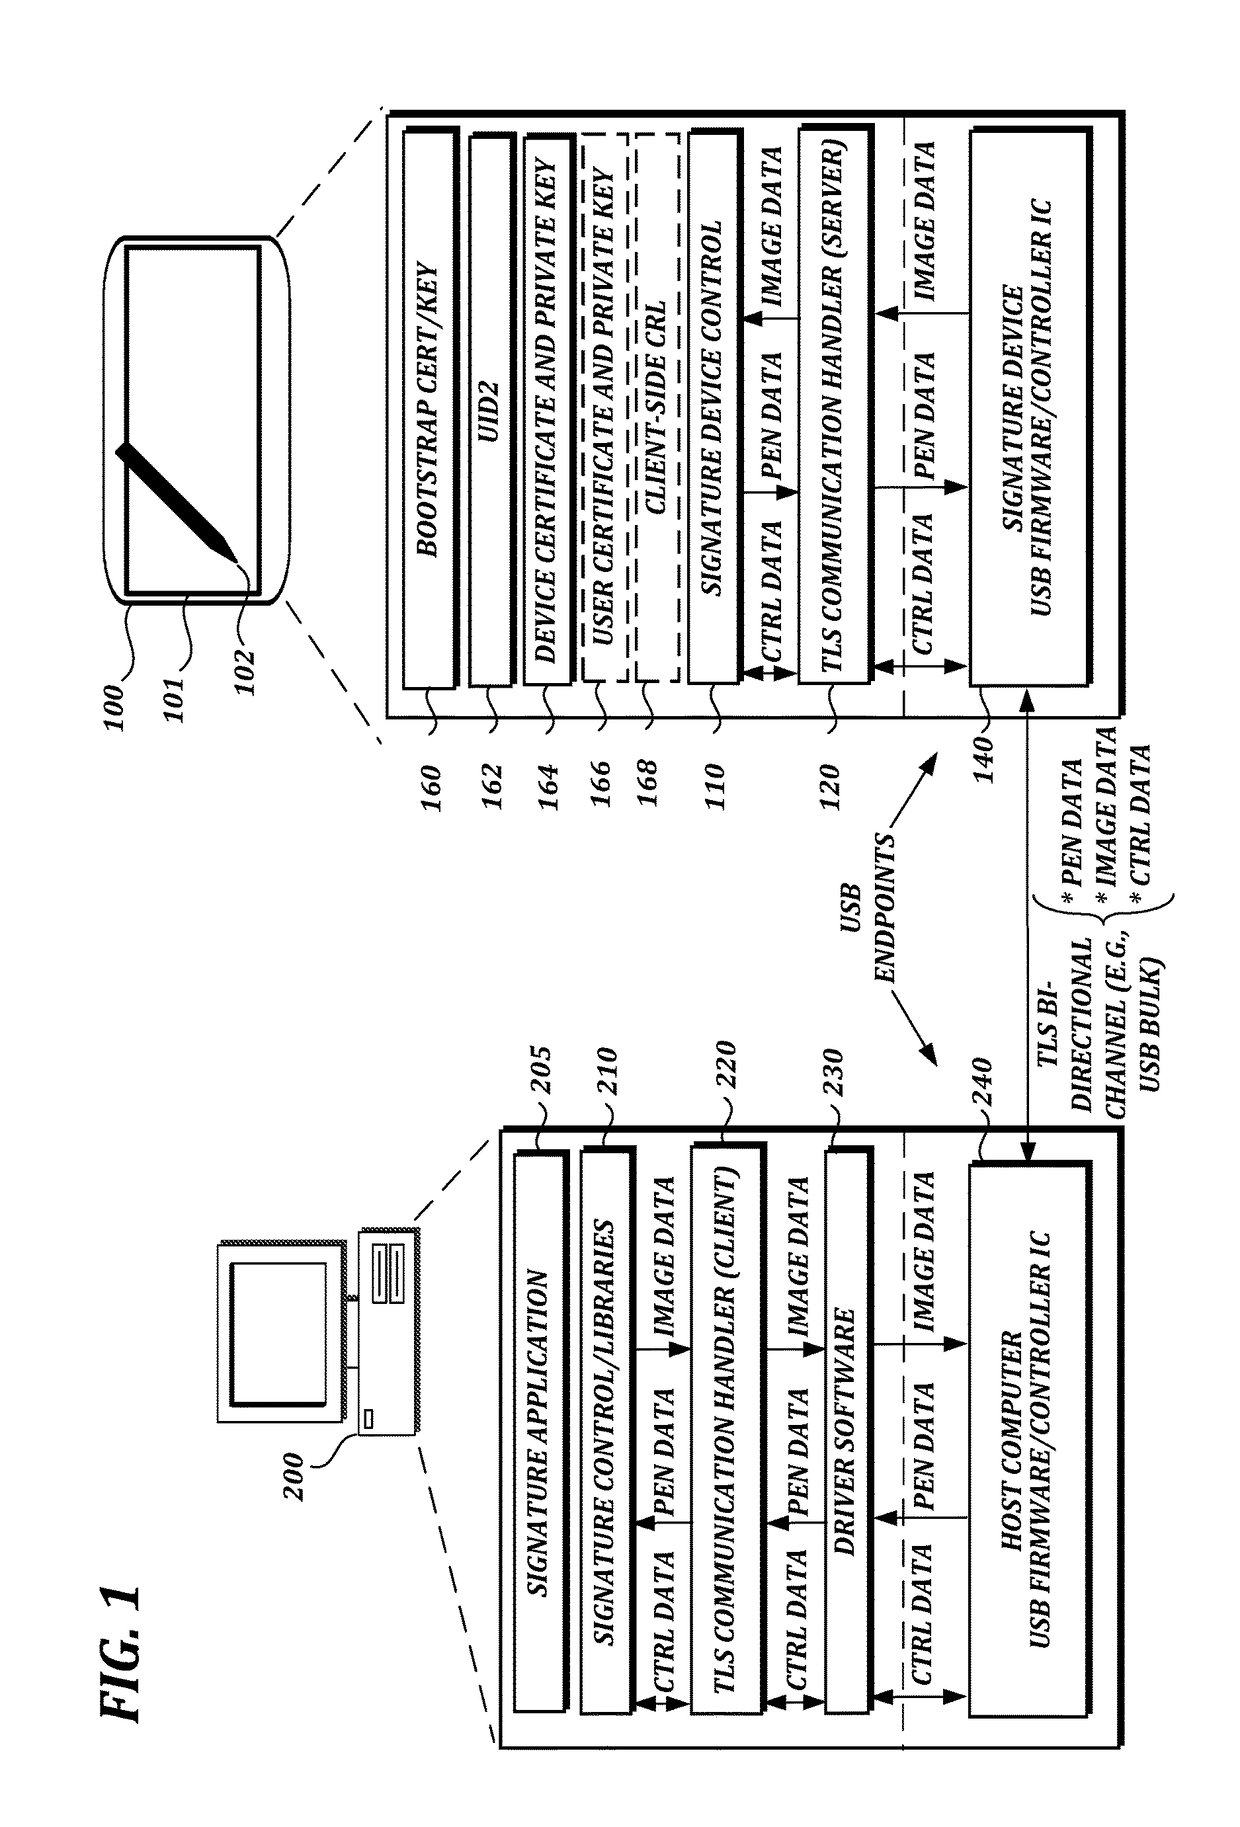 Authentication and secure transmission of data between signature devices and host computers using transport layer security